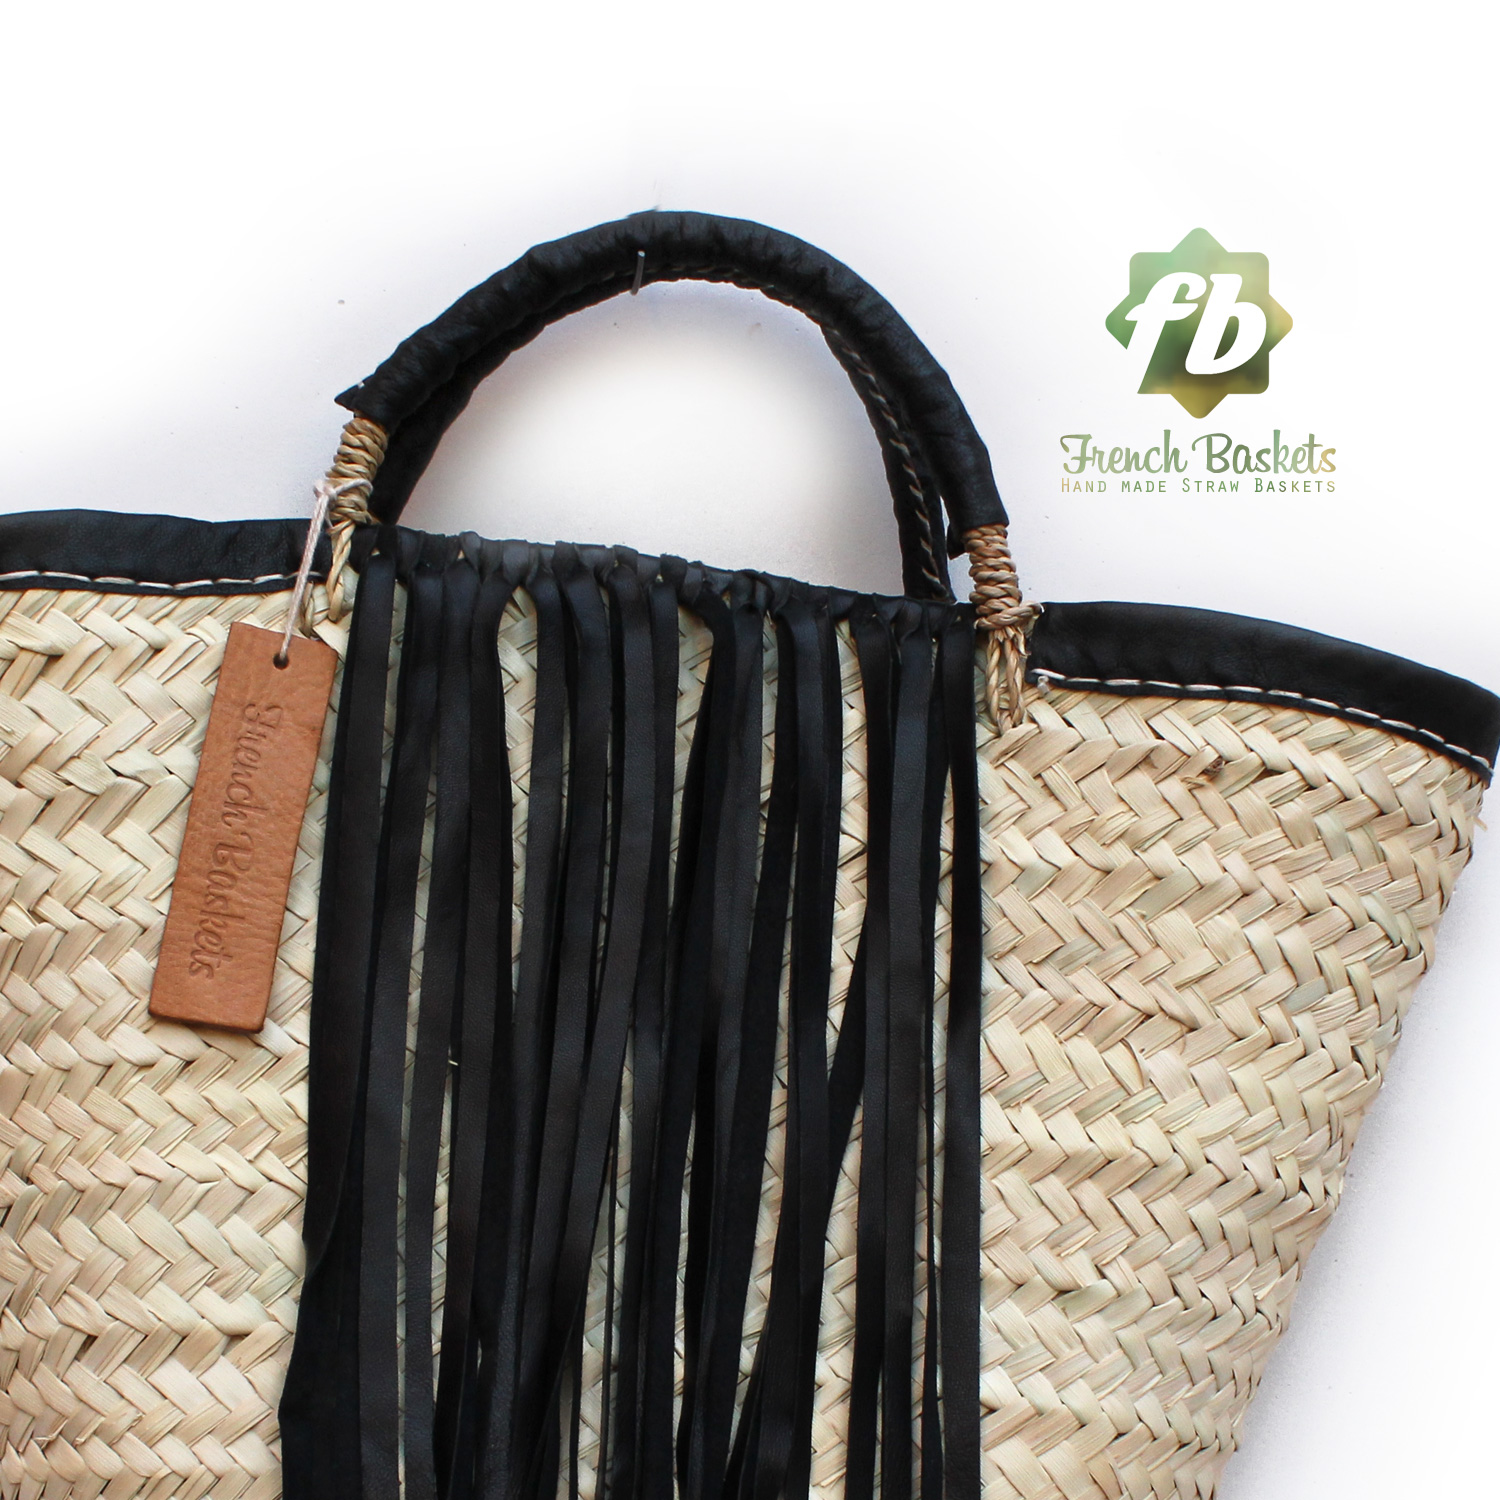 small french basket with black leather fringe